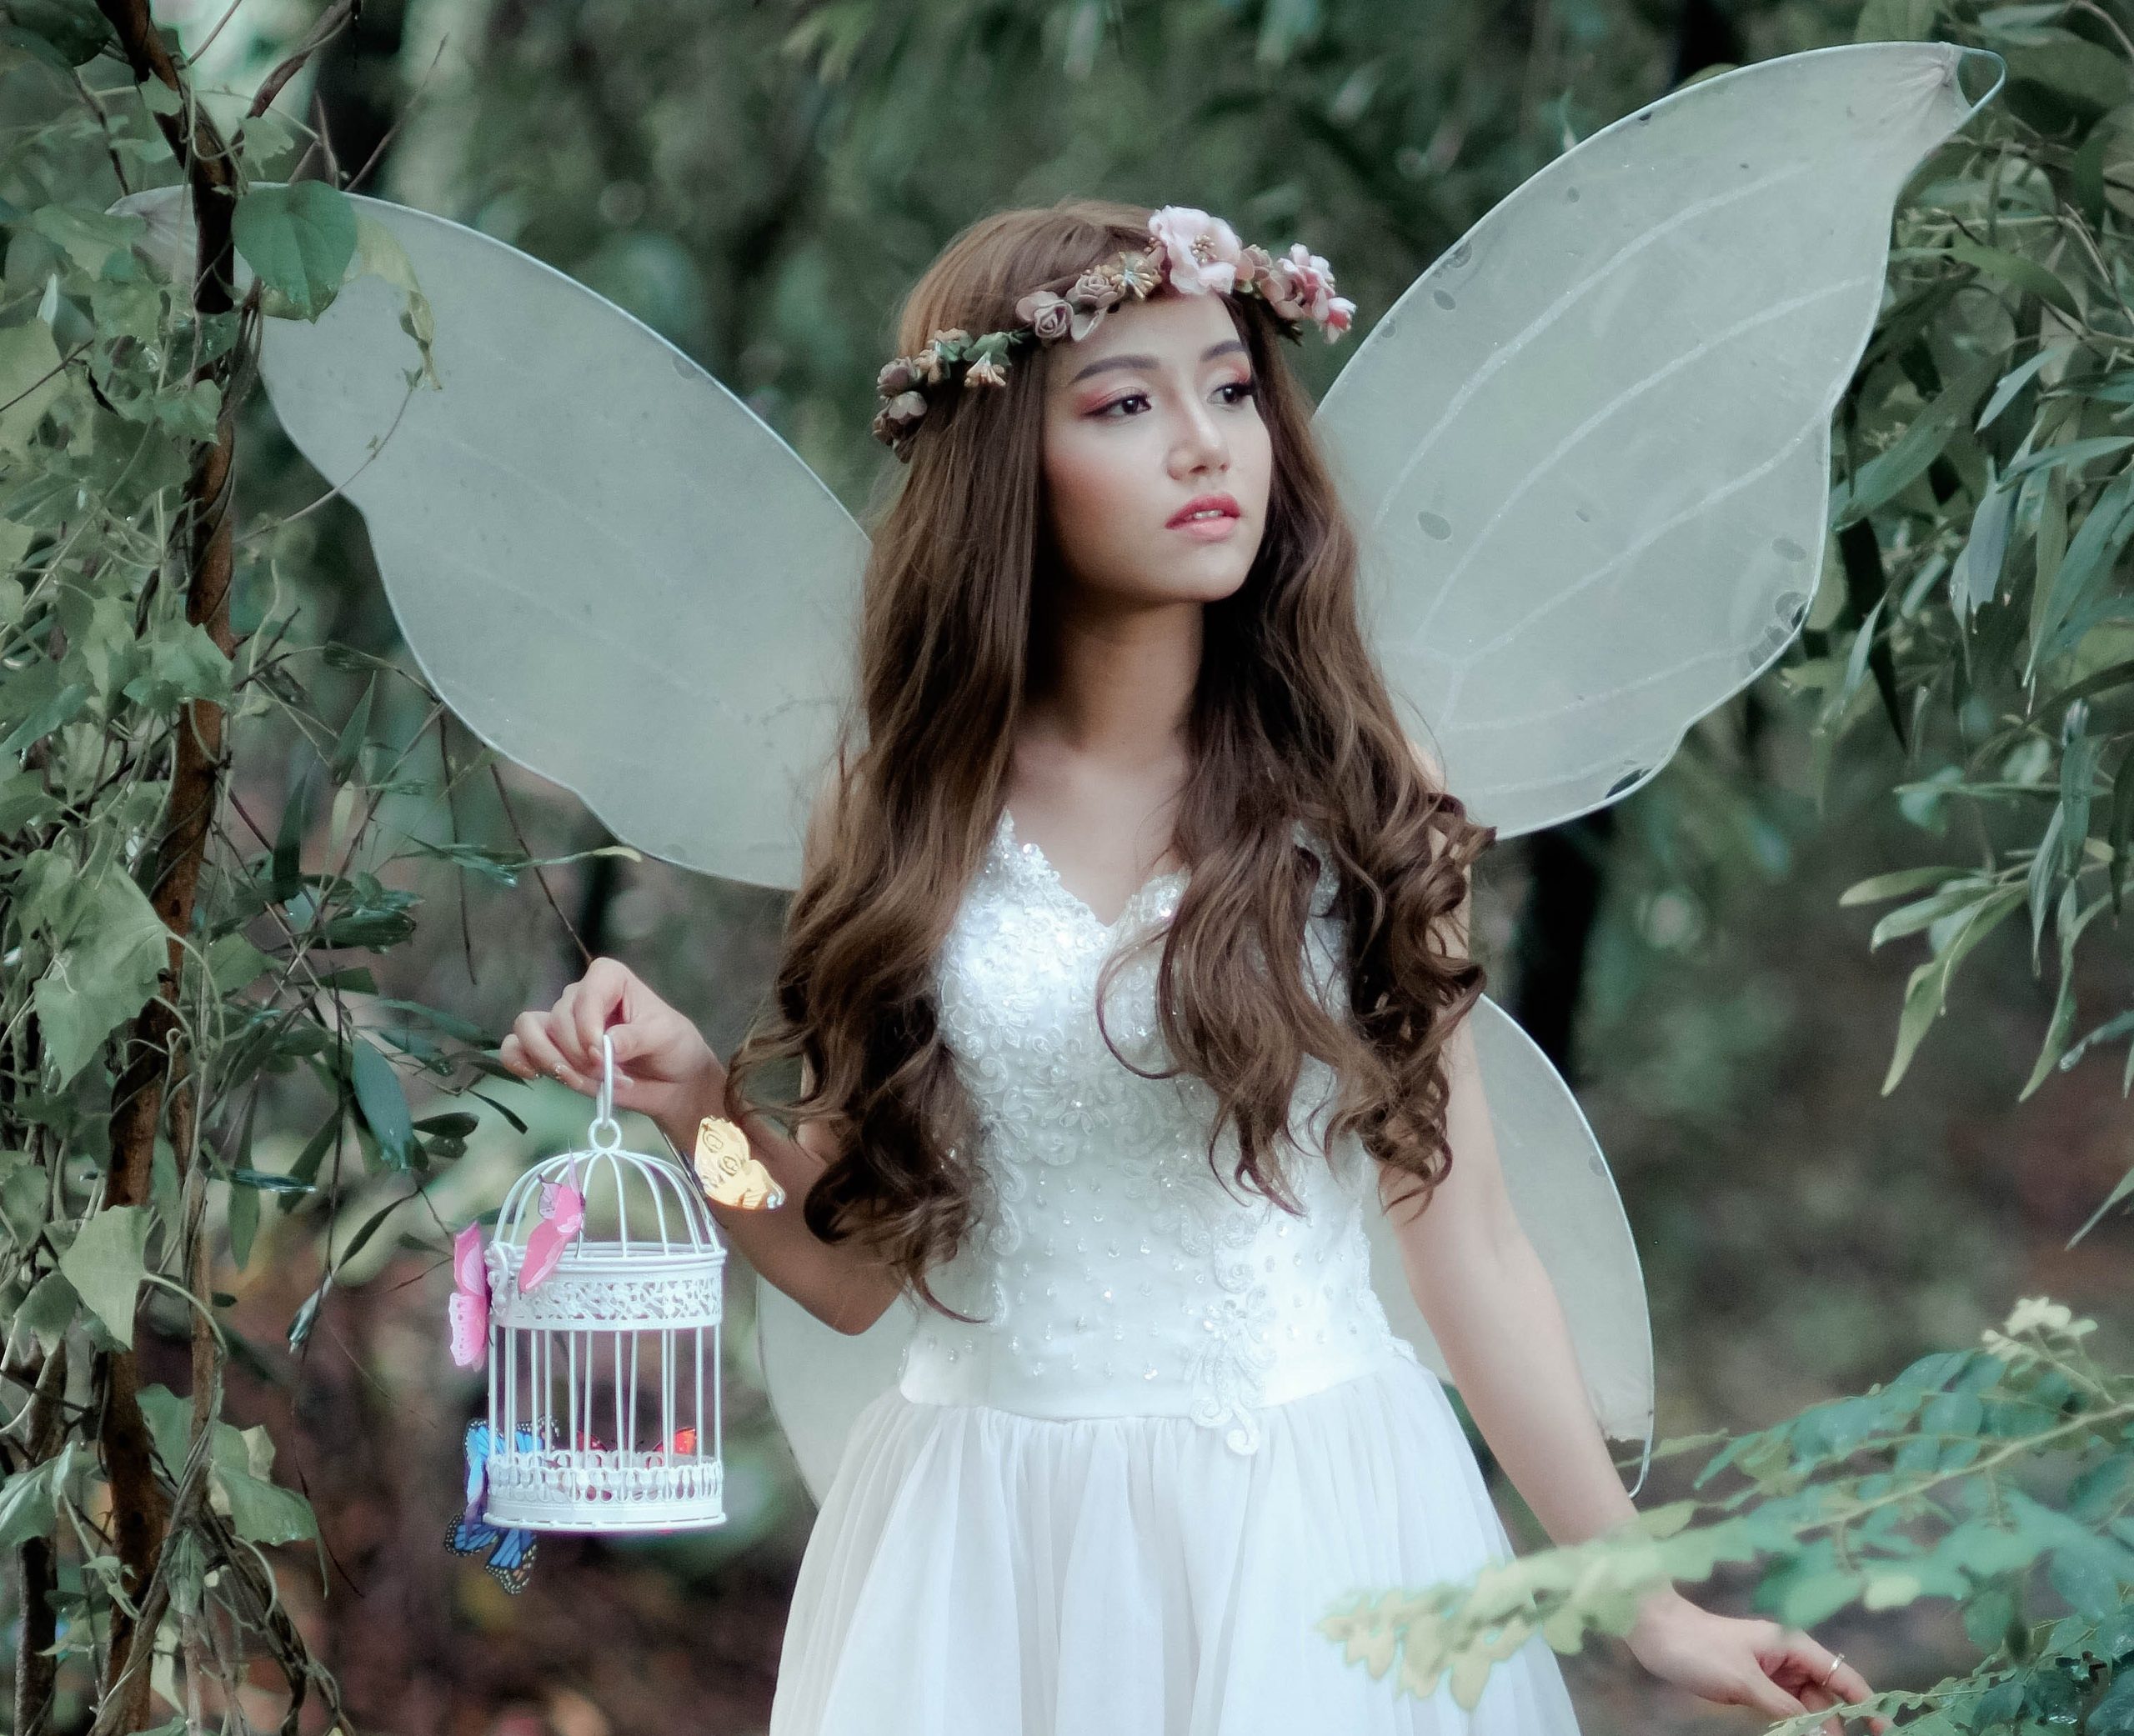 Woman dressed as a tooth fairy